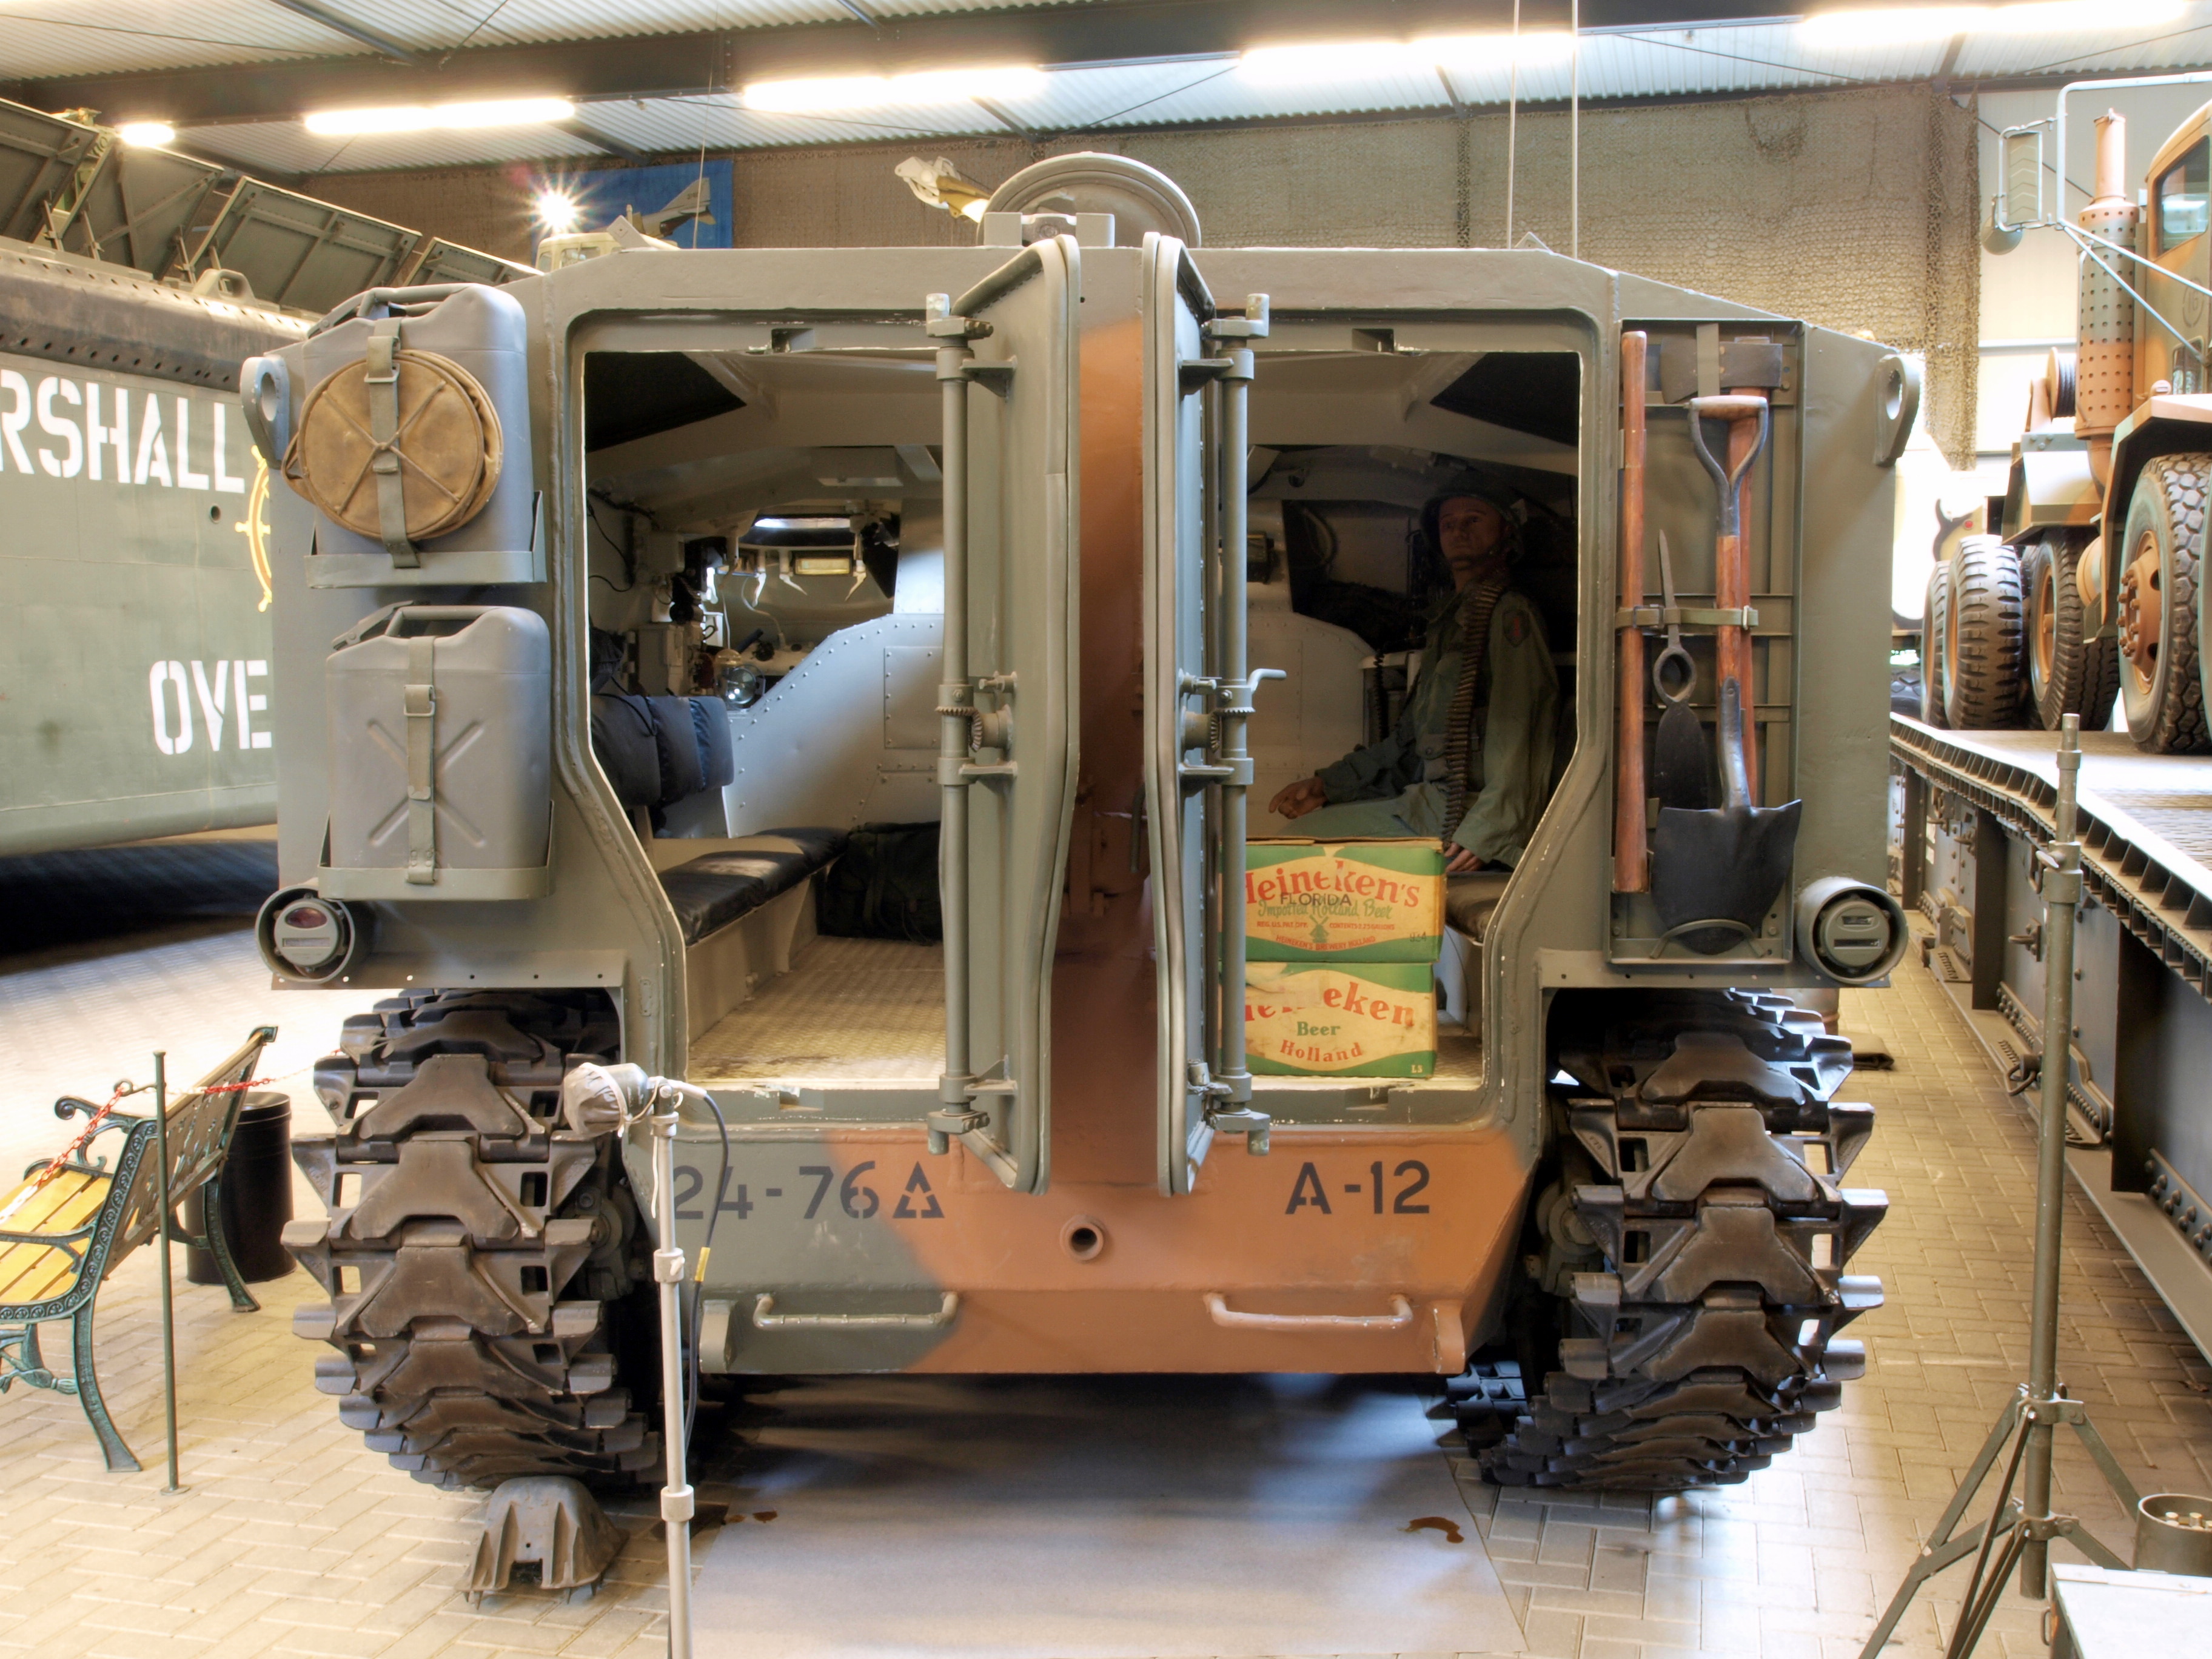 International Harvester M75 Photo Gallery: Photo #06 out of 12 ...